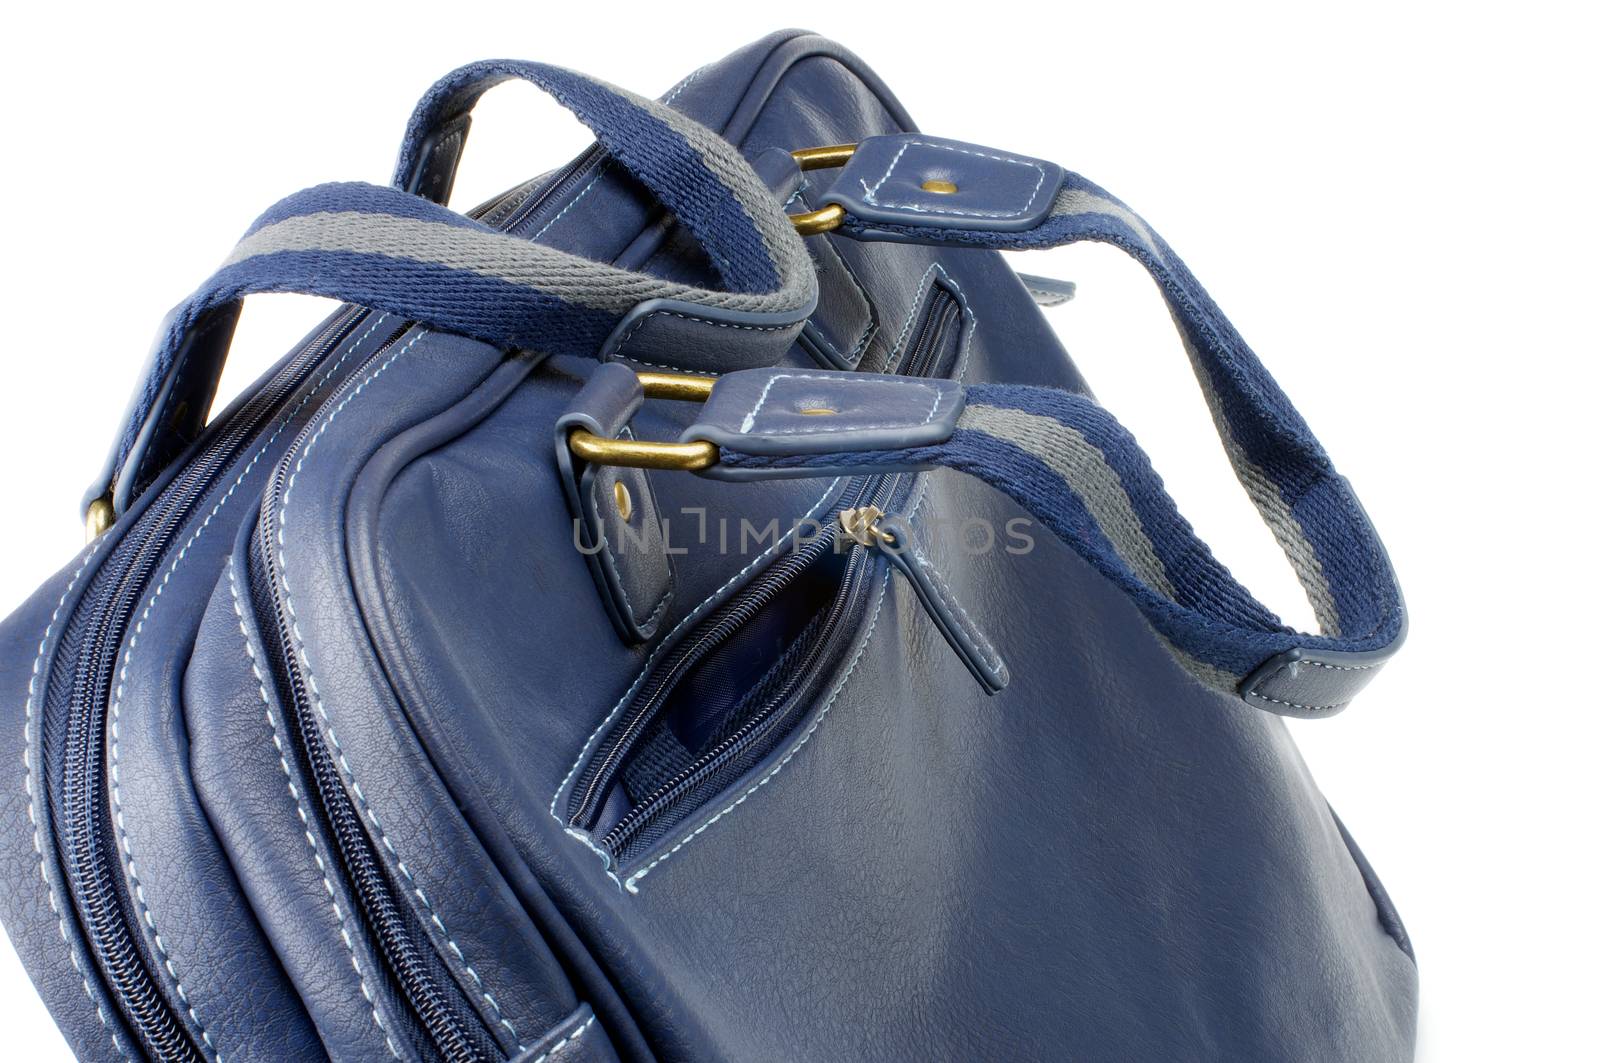 Blue Leather Sporty Bag with Gold Details and Striped Handles Cross Section on white background